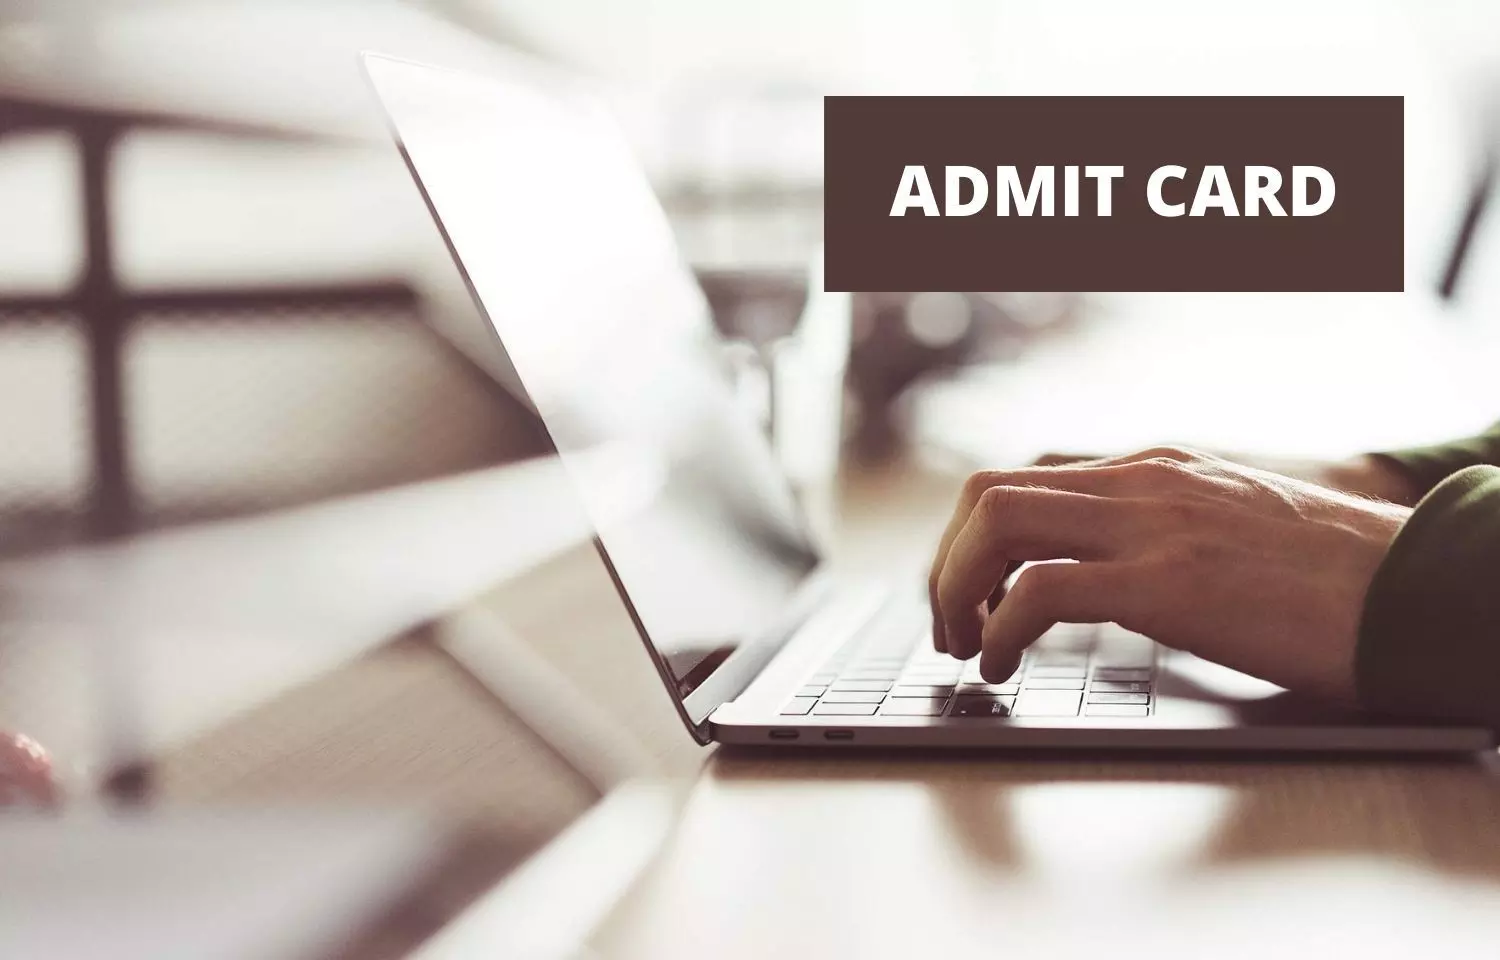 AIIMS Releases Admit Card for MBBS, MD, MS, MDS, DM, MCh Professional Exams 2021